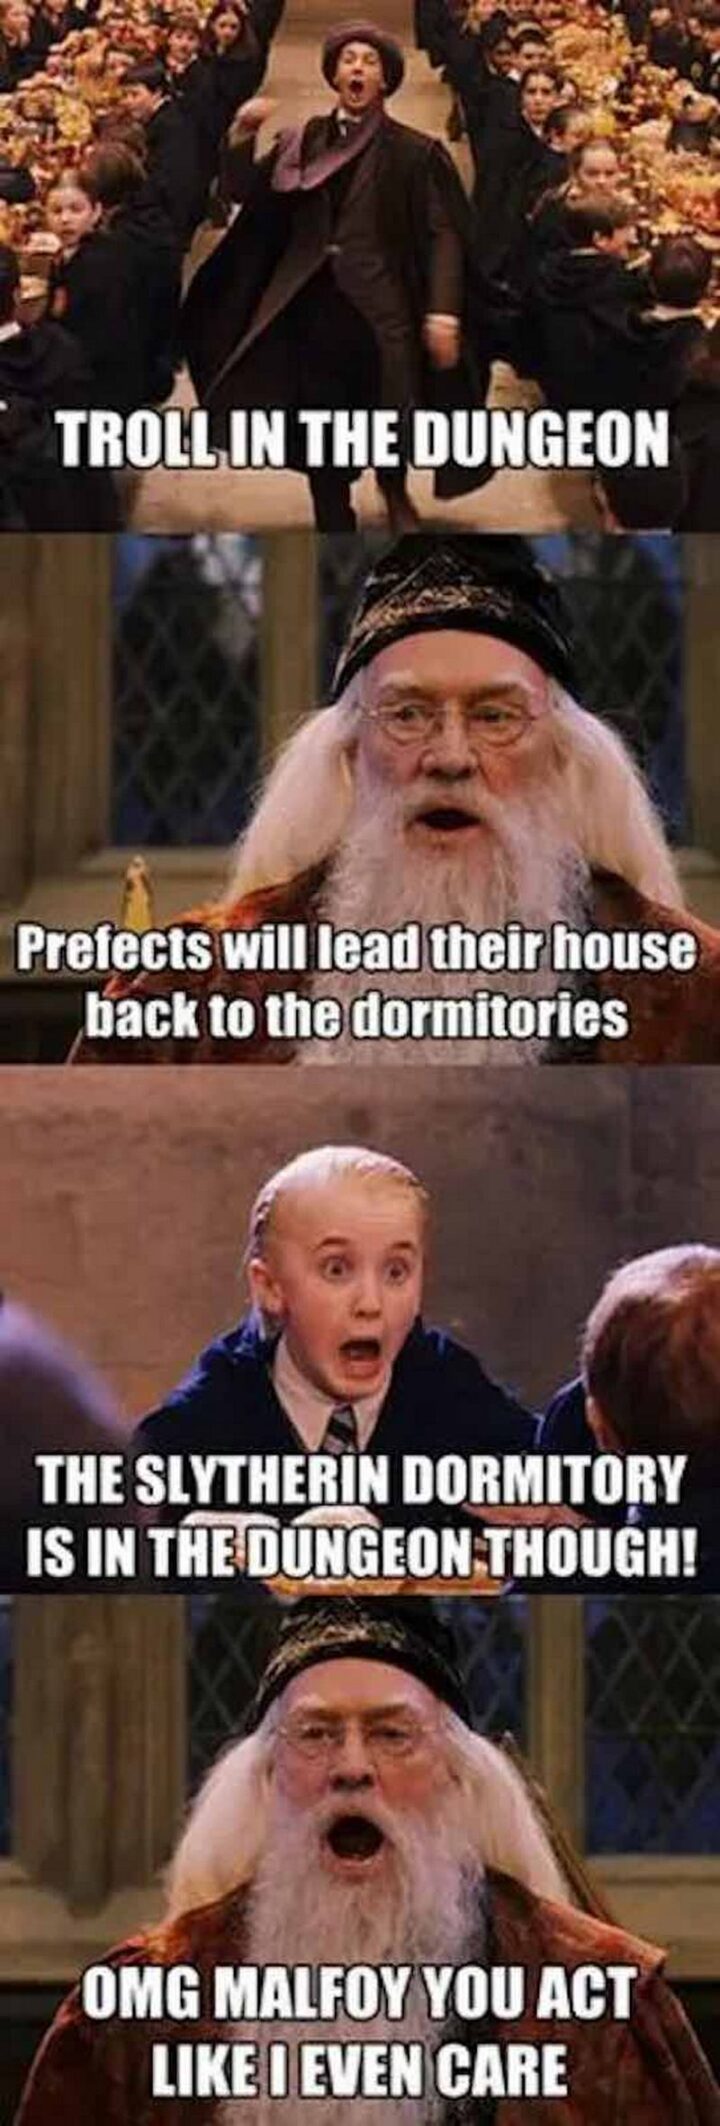 "Troll in the dungeon. Prefects will lead their house back to the dormitories. The Slytherin dormitory is in the dungeon though! OMG Malfoy you act like I even care."